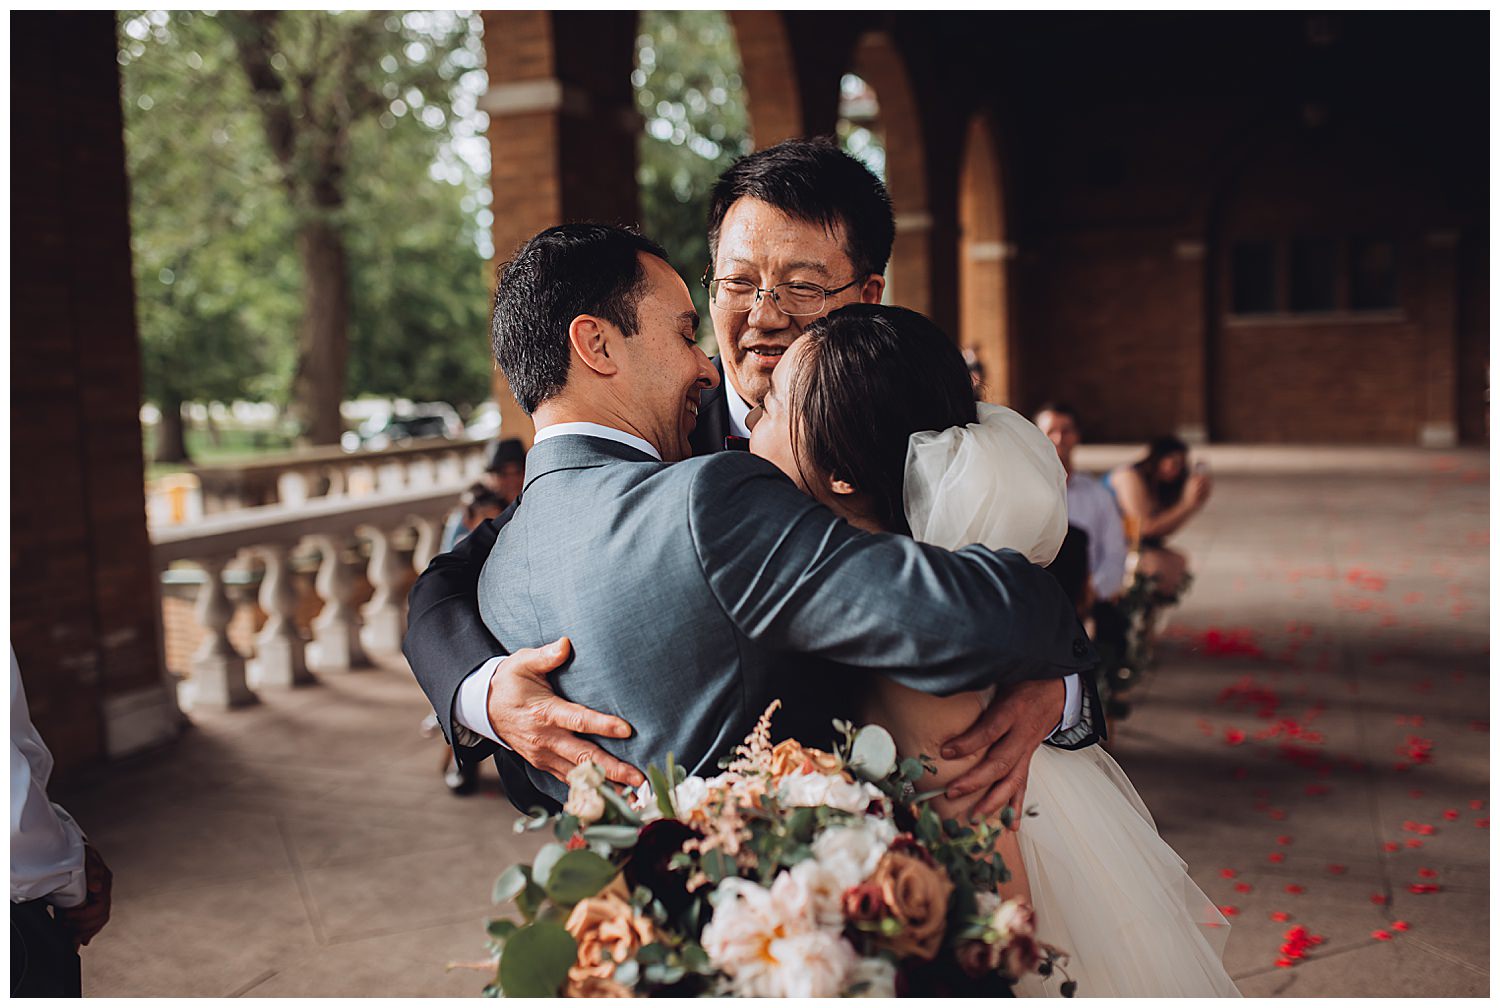 Columbus Park Refectory Wedding, father of the bride hugging the groom and bride